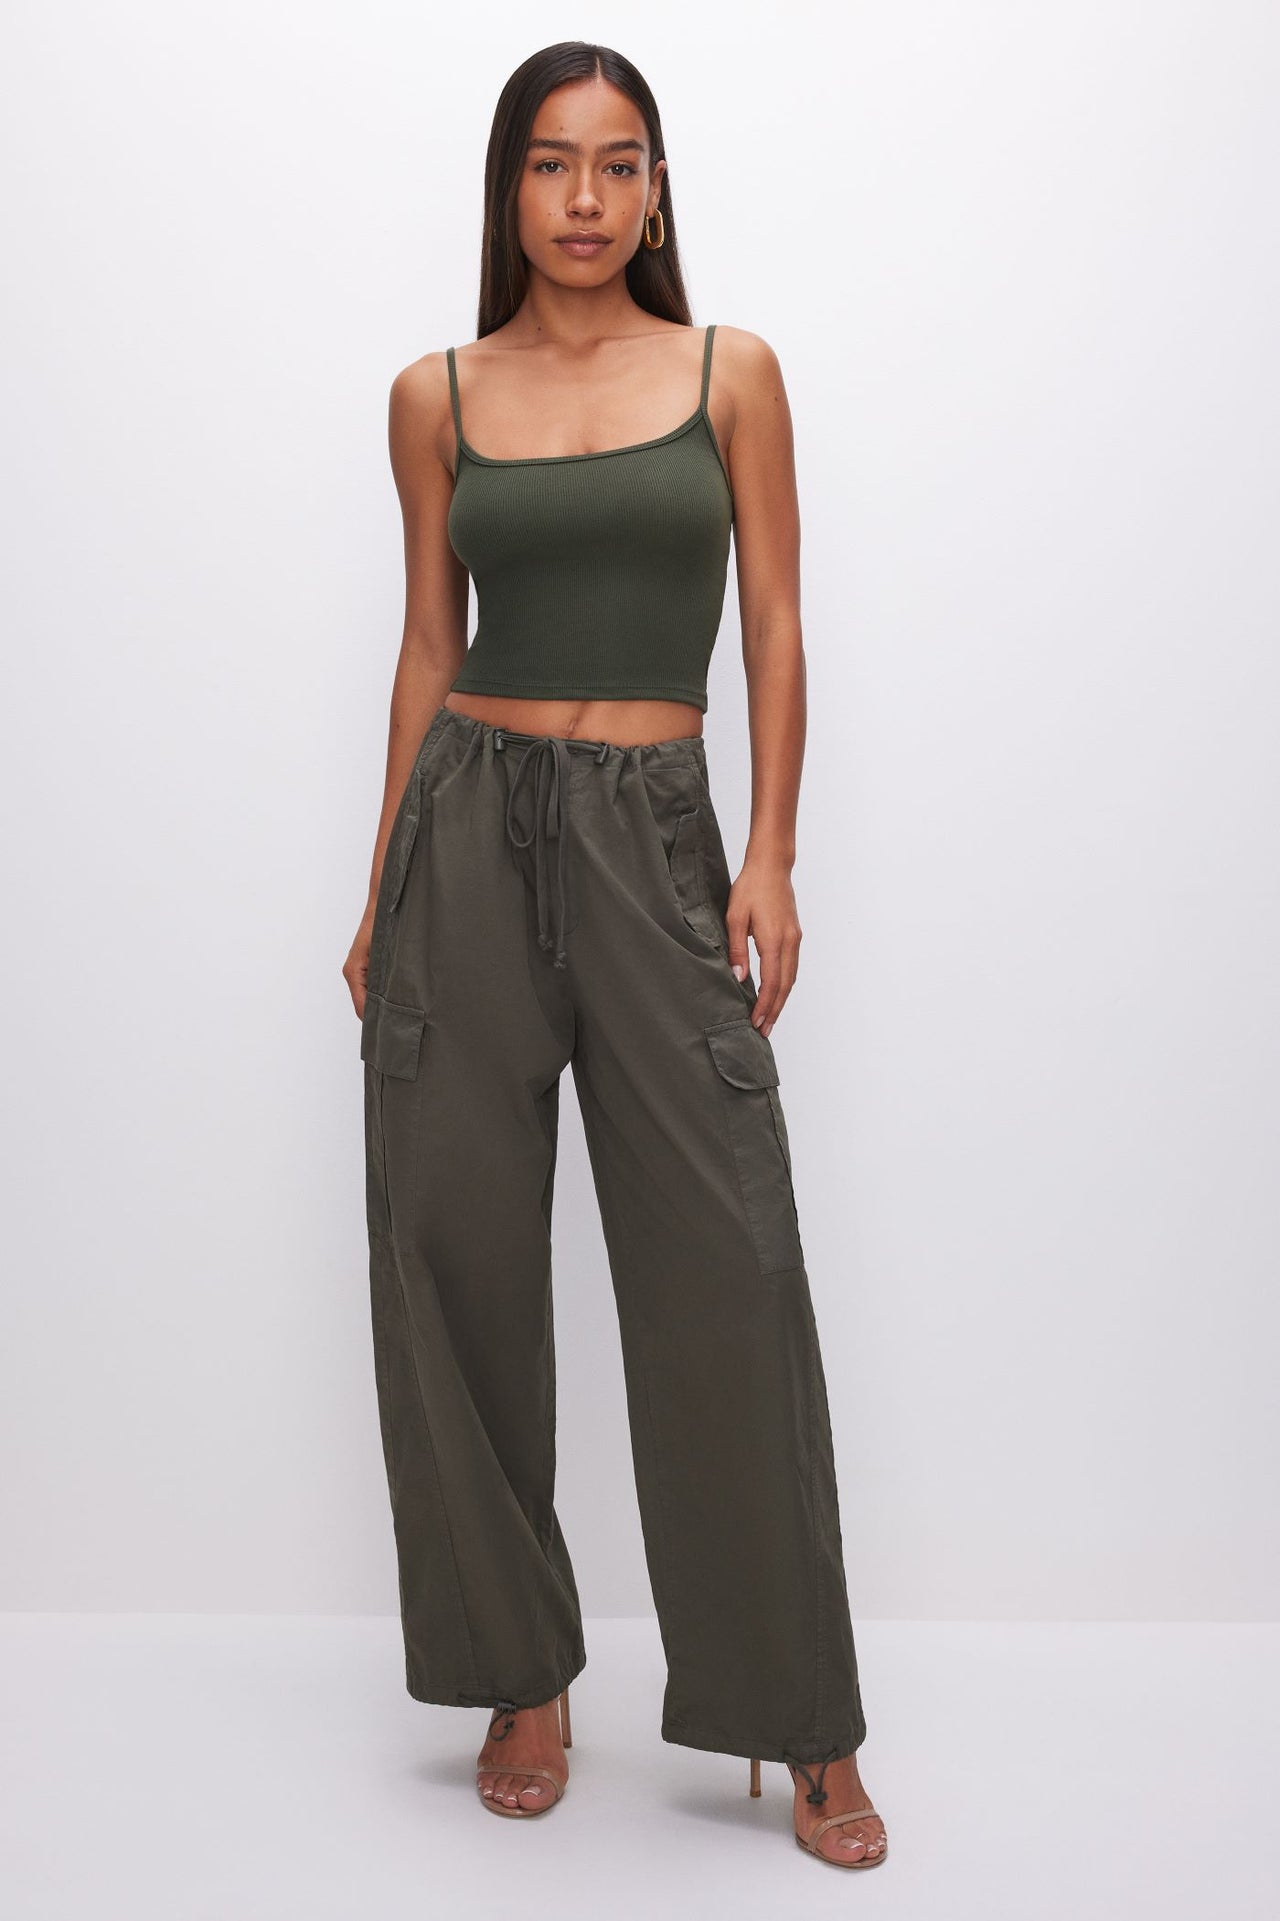 Parachute Pant Green, Pant bottom by Good American | LIT Boutique